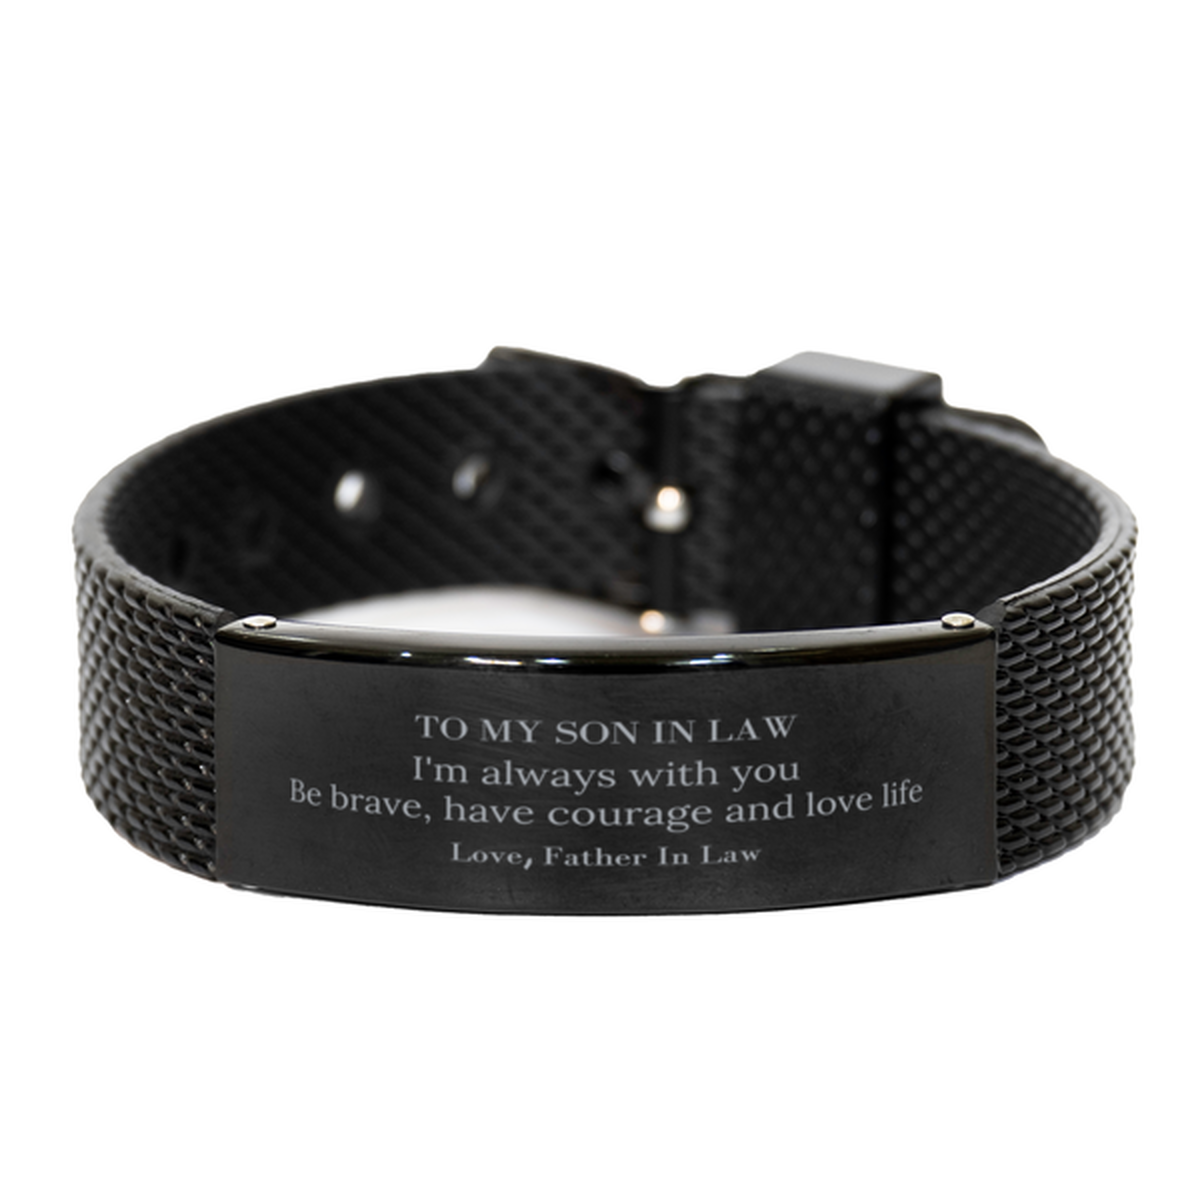 To My Son In Law Gifts from Father In Law, Unique Black Shark Mesh Bracelet Inspirational Christmas Birthday Graduation Gifts for Son In Law I'm always with you. Be brave, have courage and love life. Love, Father In Law